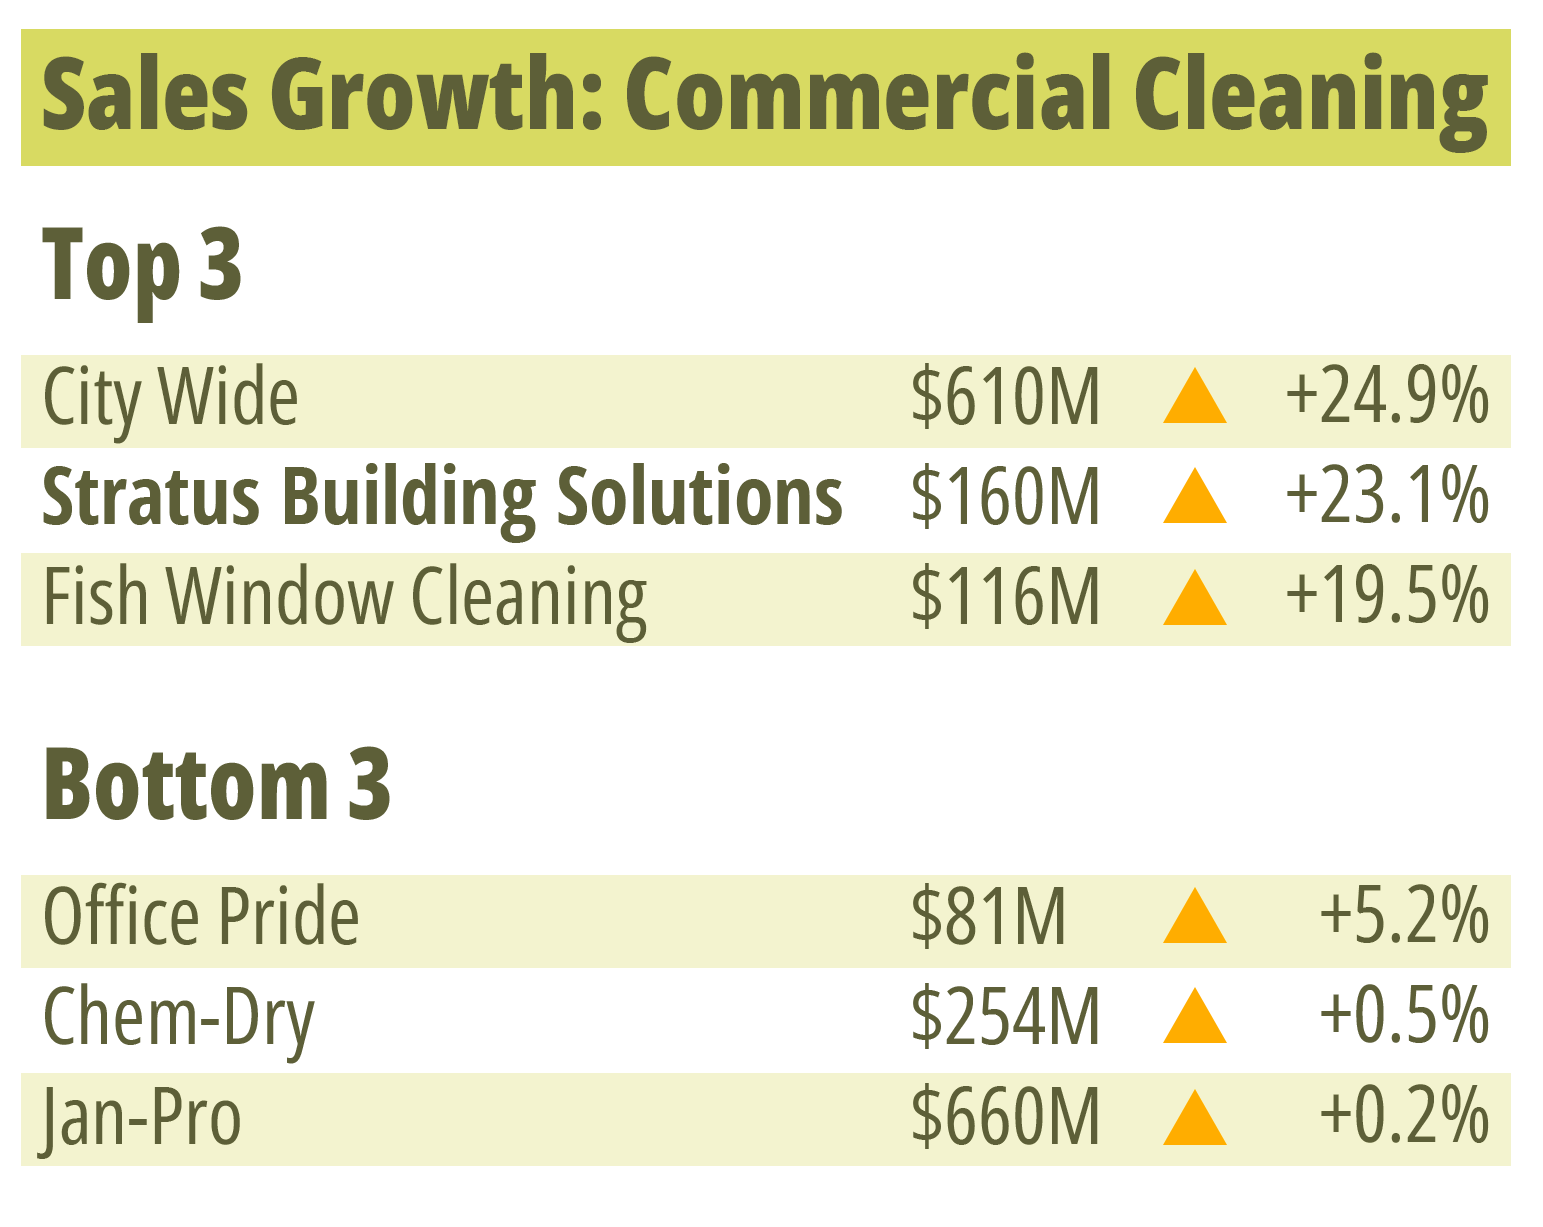 Chart Showing Commercial Cleaning Sales Growth with Stratus in the Second Top Spot